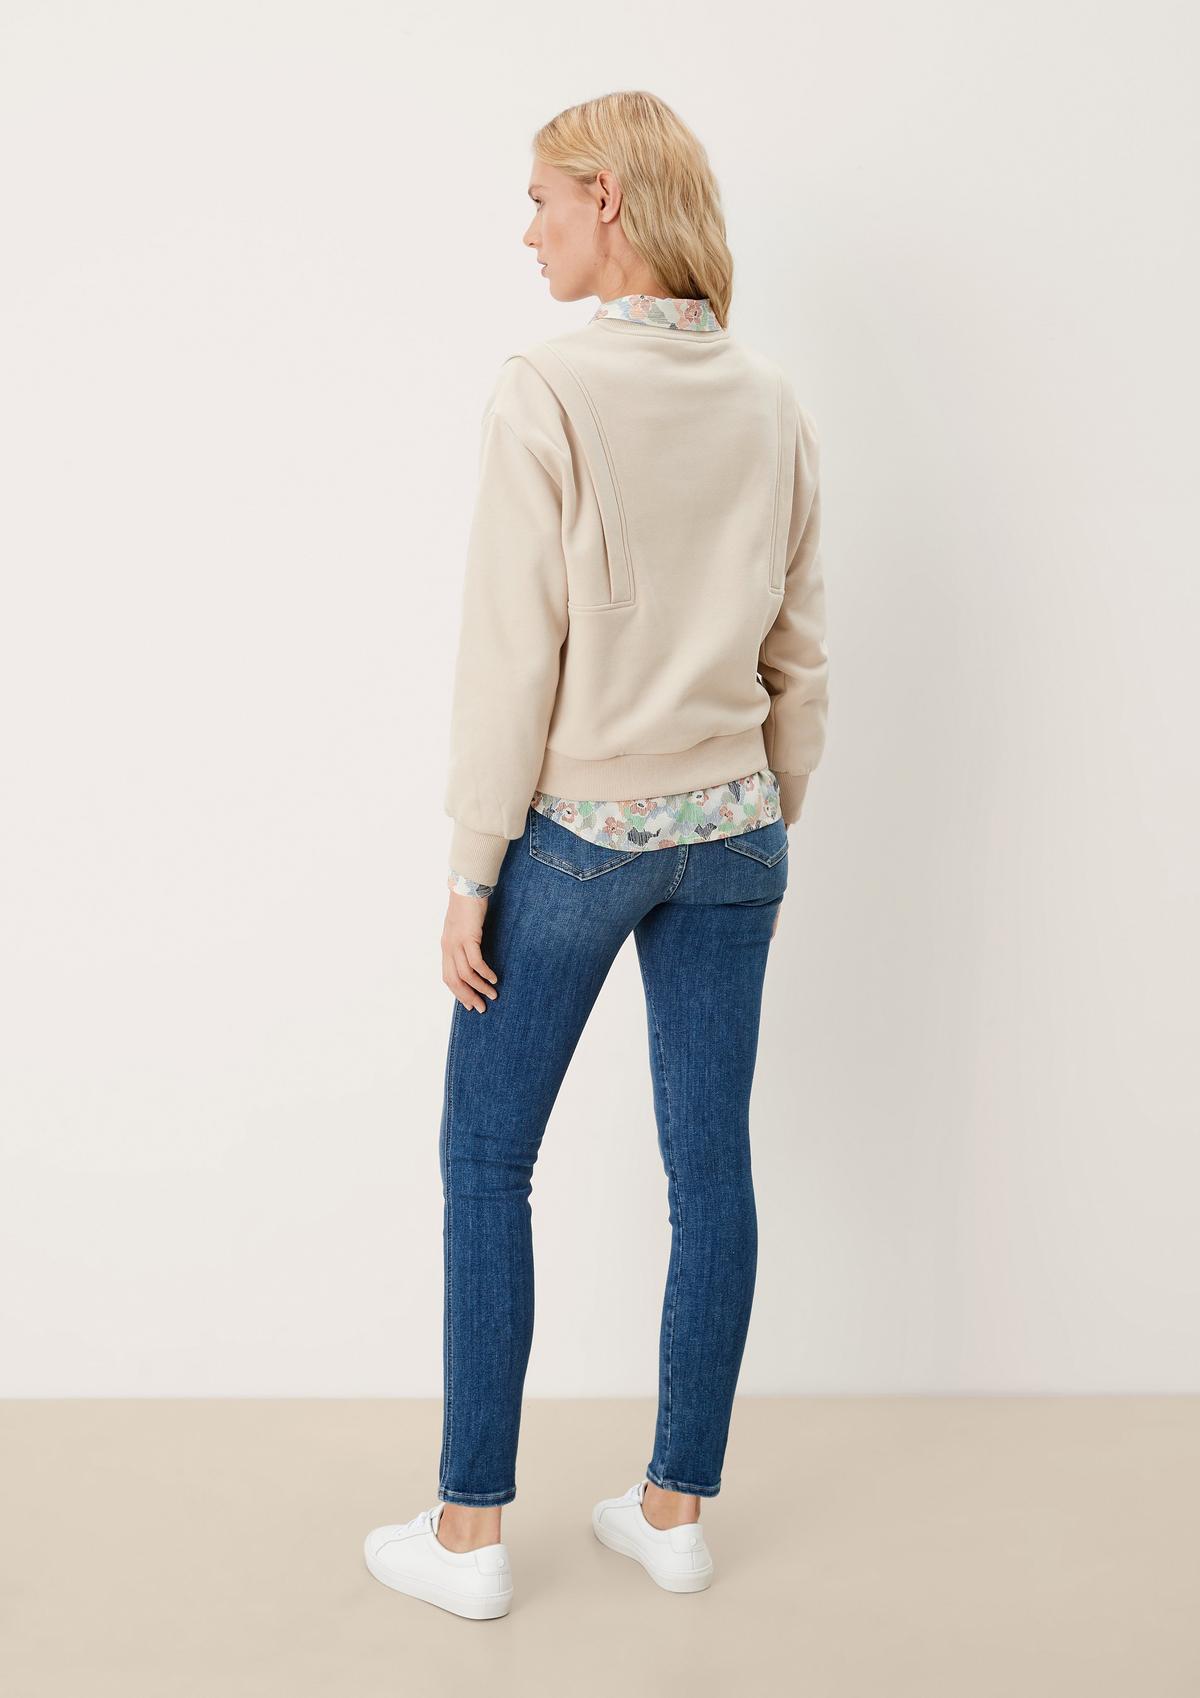 s.Oliver Softer Sweater mit Wording